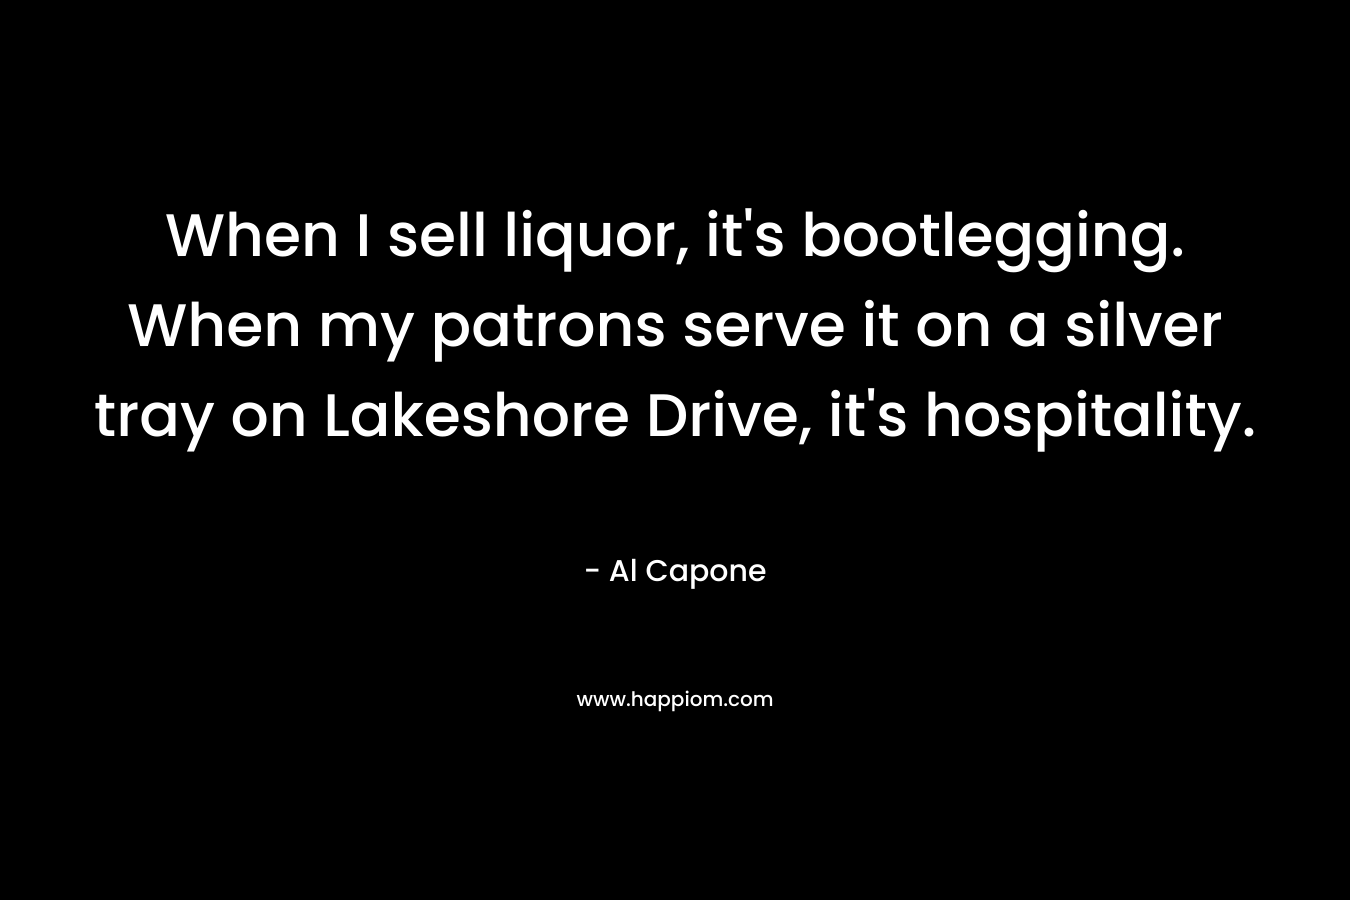 When I sell liquor, it’s bootlegging. When my patrons serve it on a silver tray on Lakeshore Drive, it’s hospitality. – Al Capone